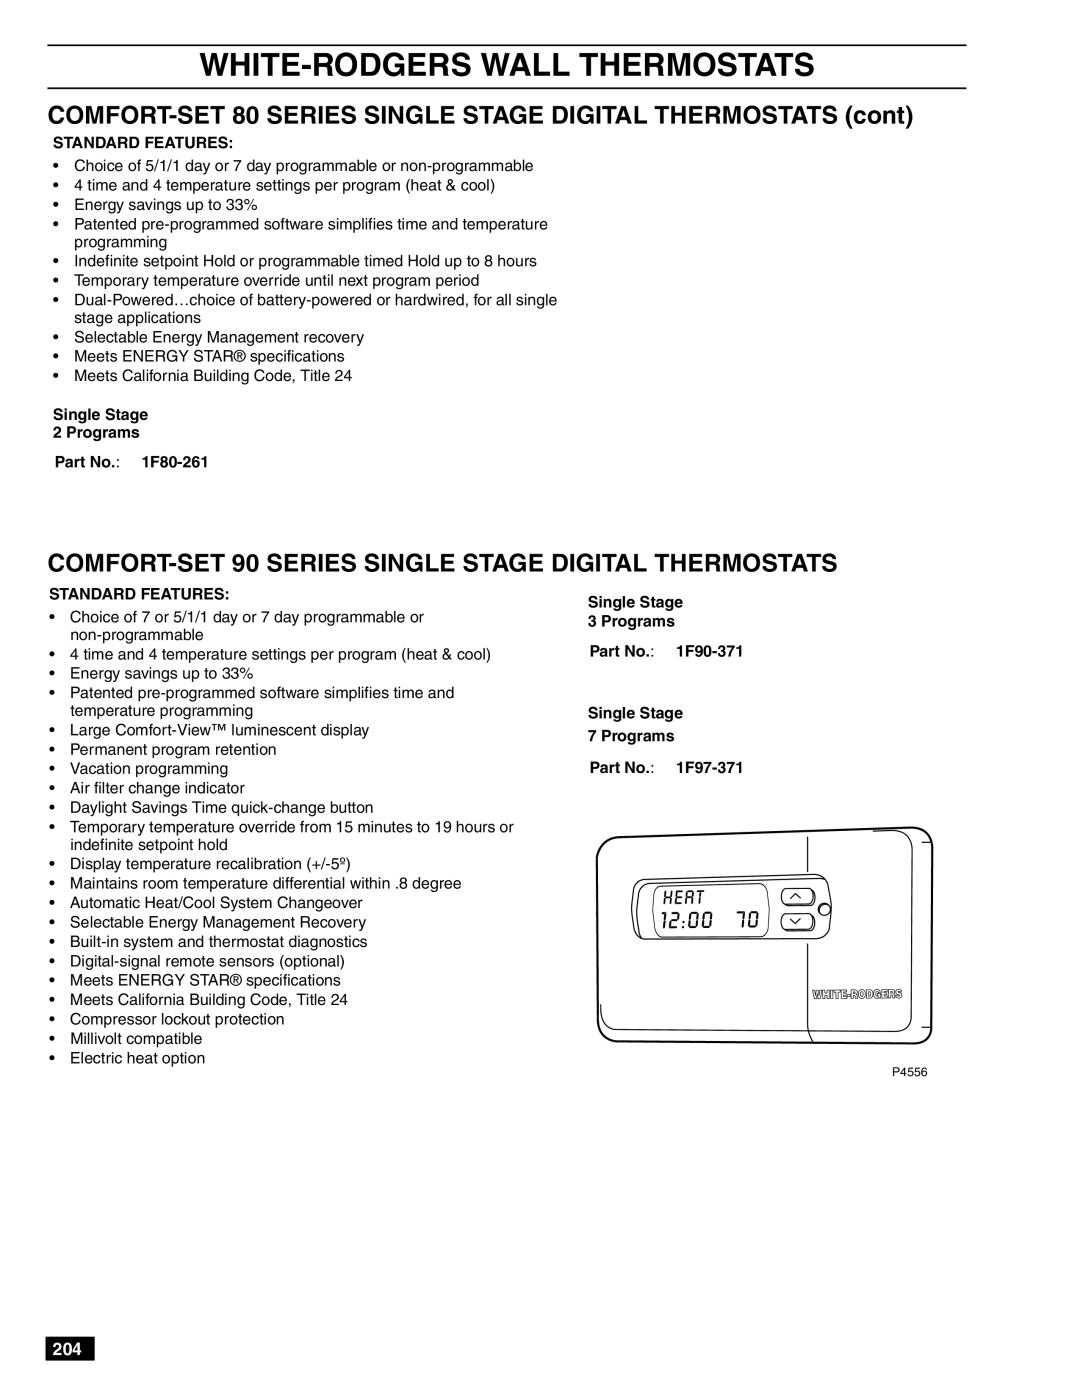 White Rodgers 1F56-301 COMFORT-SET 80 SERIES SINGLE STAGE DIGITAL THERMOSTATS cont, Part No. 1F97-371, Standard Features 